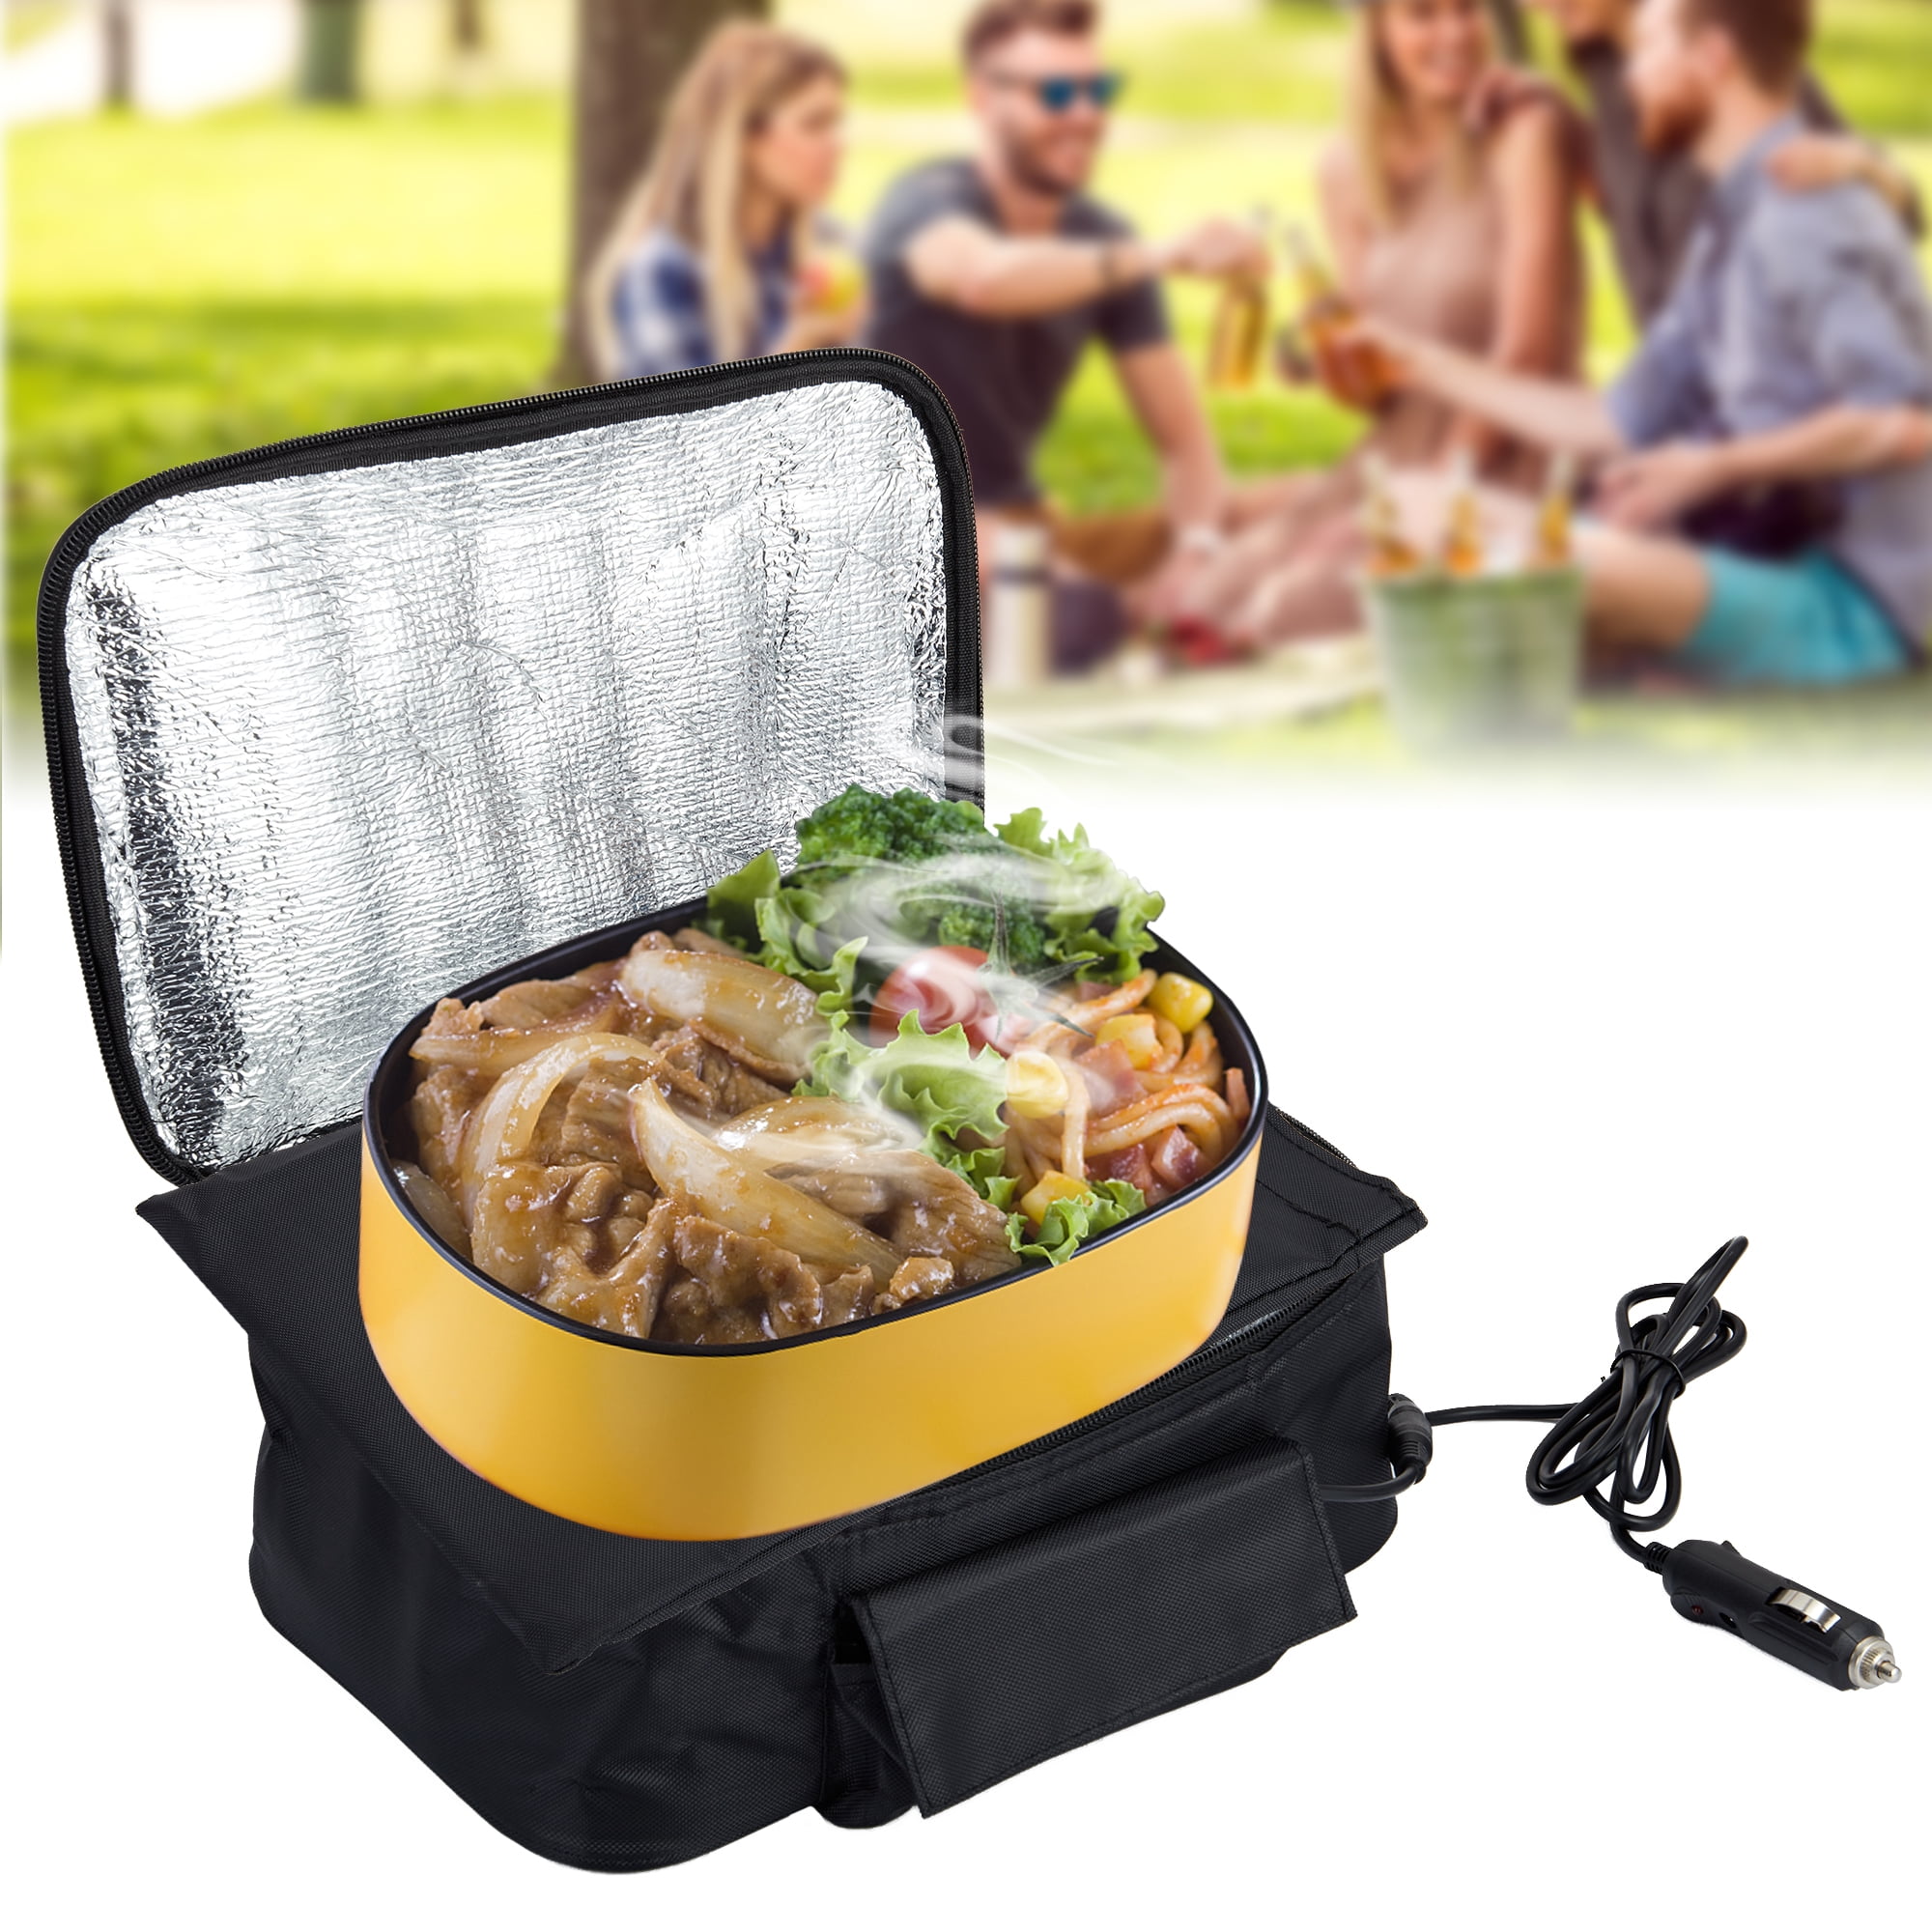 RNAB09PC722K5 adsire oven lunch box, 11.0x7.9x4.7inch car food warmer  electric heated 90w car microwave oven for family